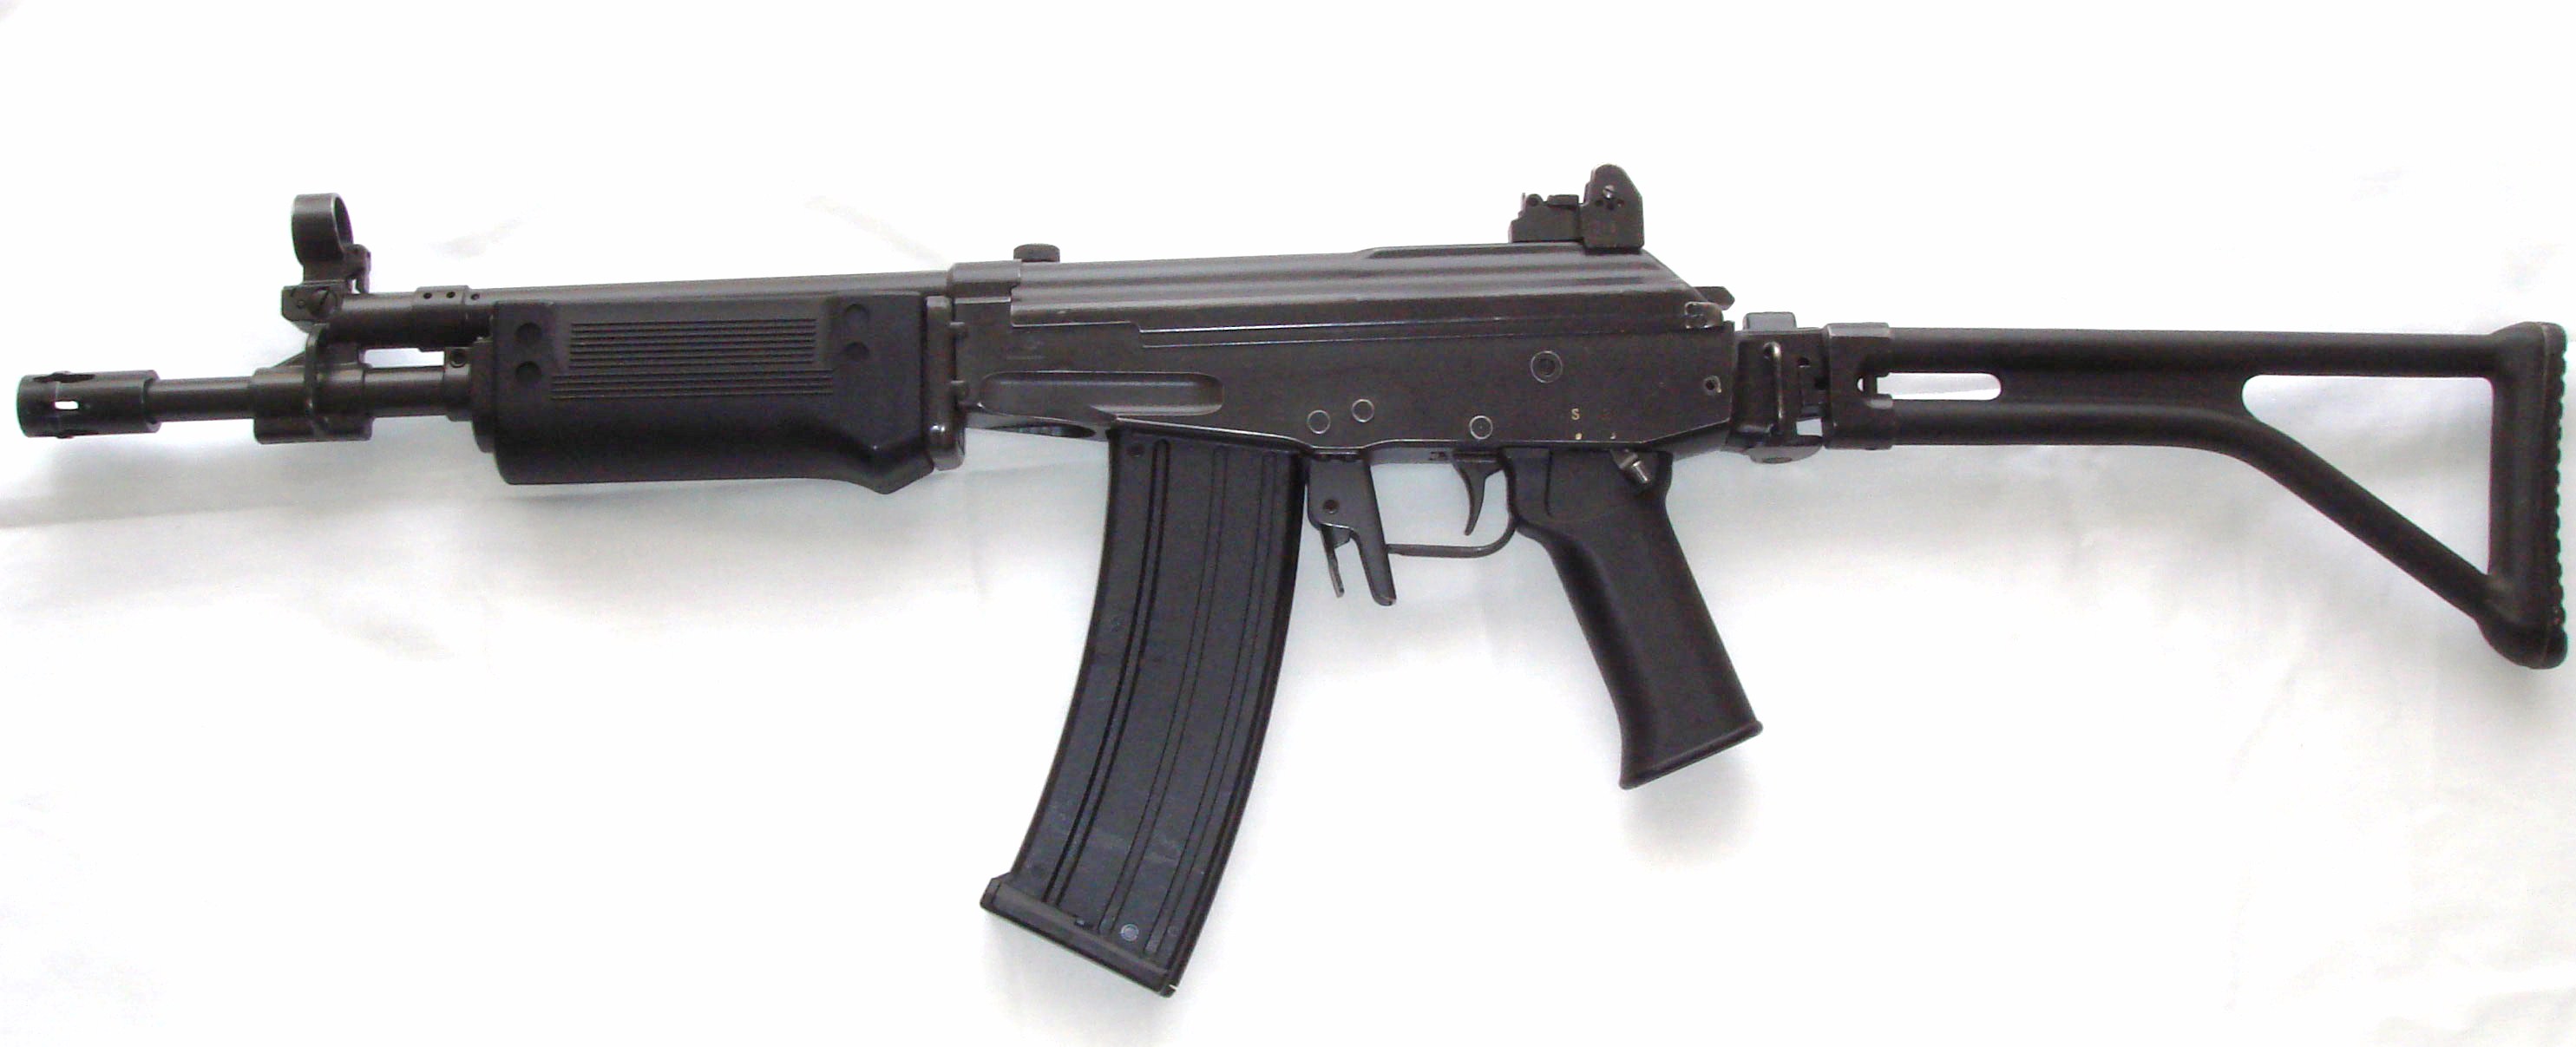 This Is A Galil... It Has A Standard Color... It's Regular Magazine Holds 30 To 35 Bullets... And It's Extended Mags Hold About 40 Bullets... Enjoy The Photo... ;)